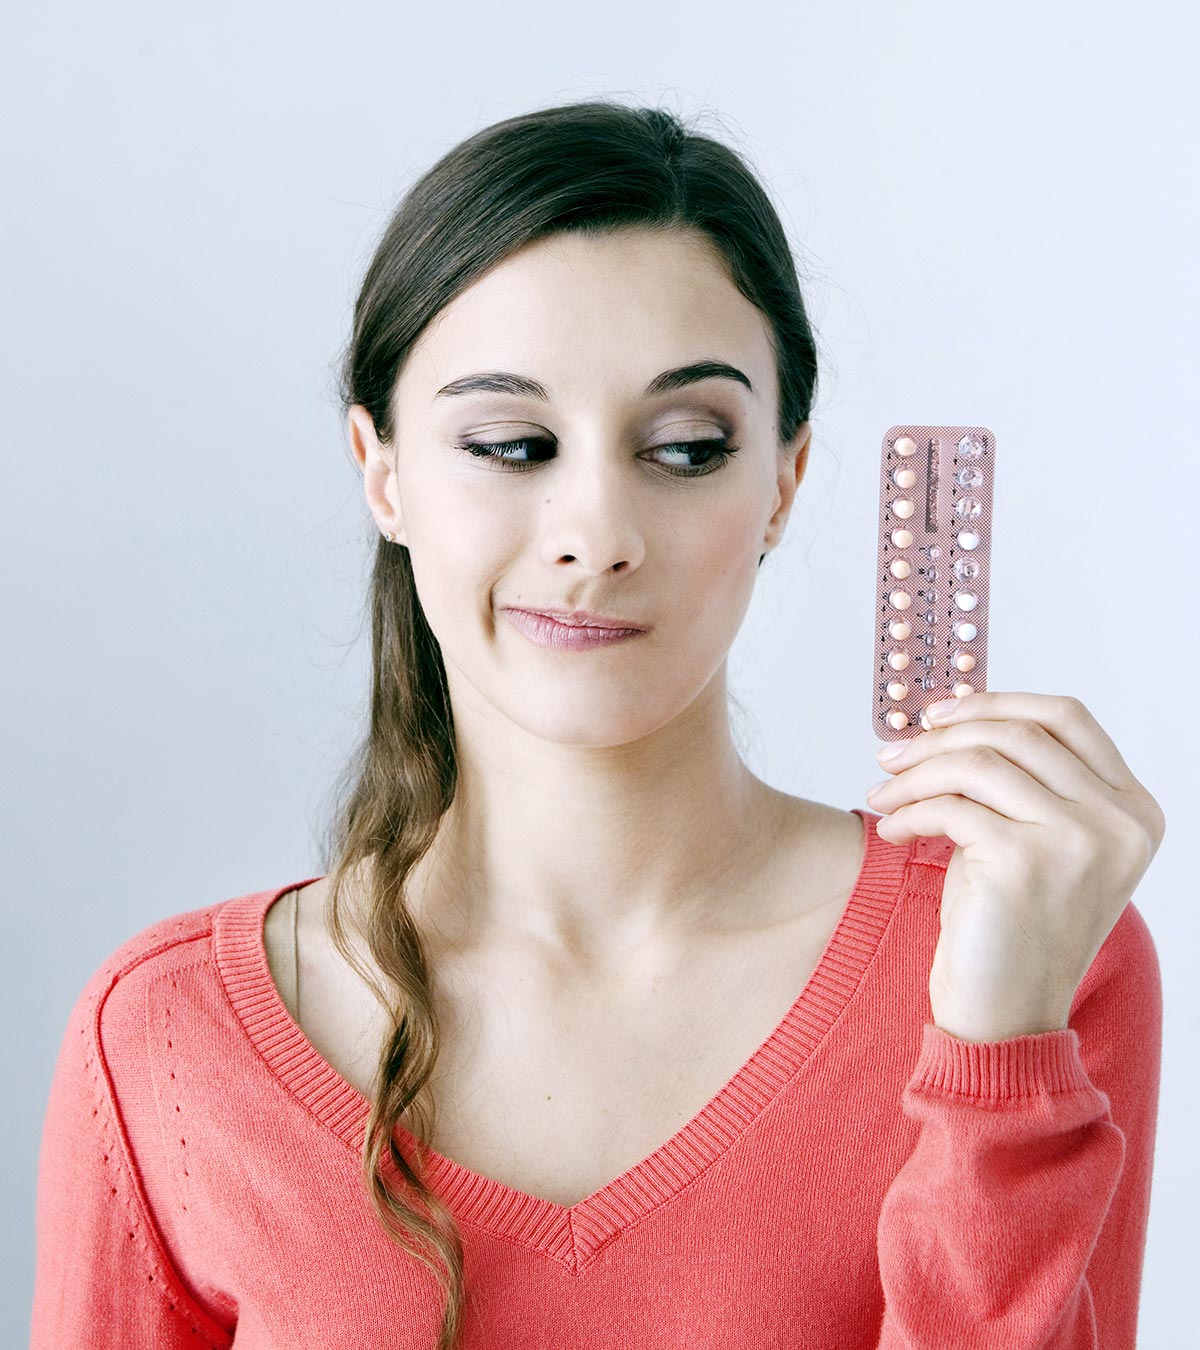 Is It Normal To Have Brown Discharge While On Birth Control Pills?